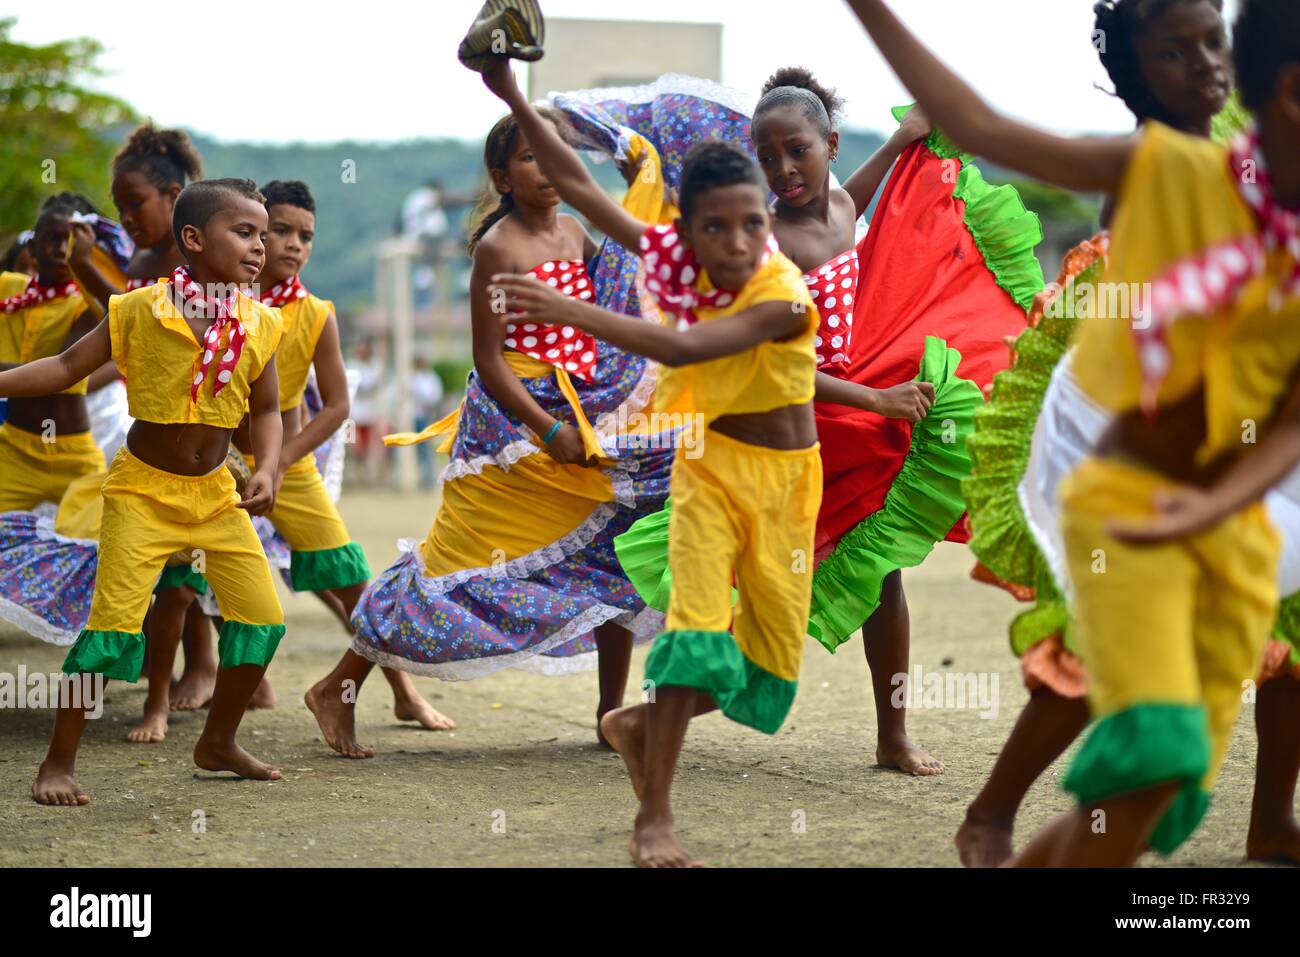 afro-colombian-dances-with-colorful-traditional-clothing-FR32Y9.jpg